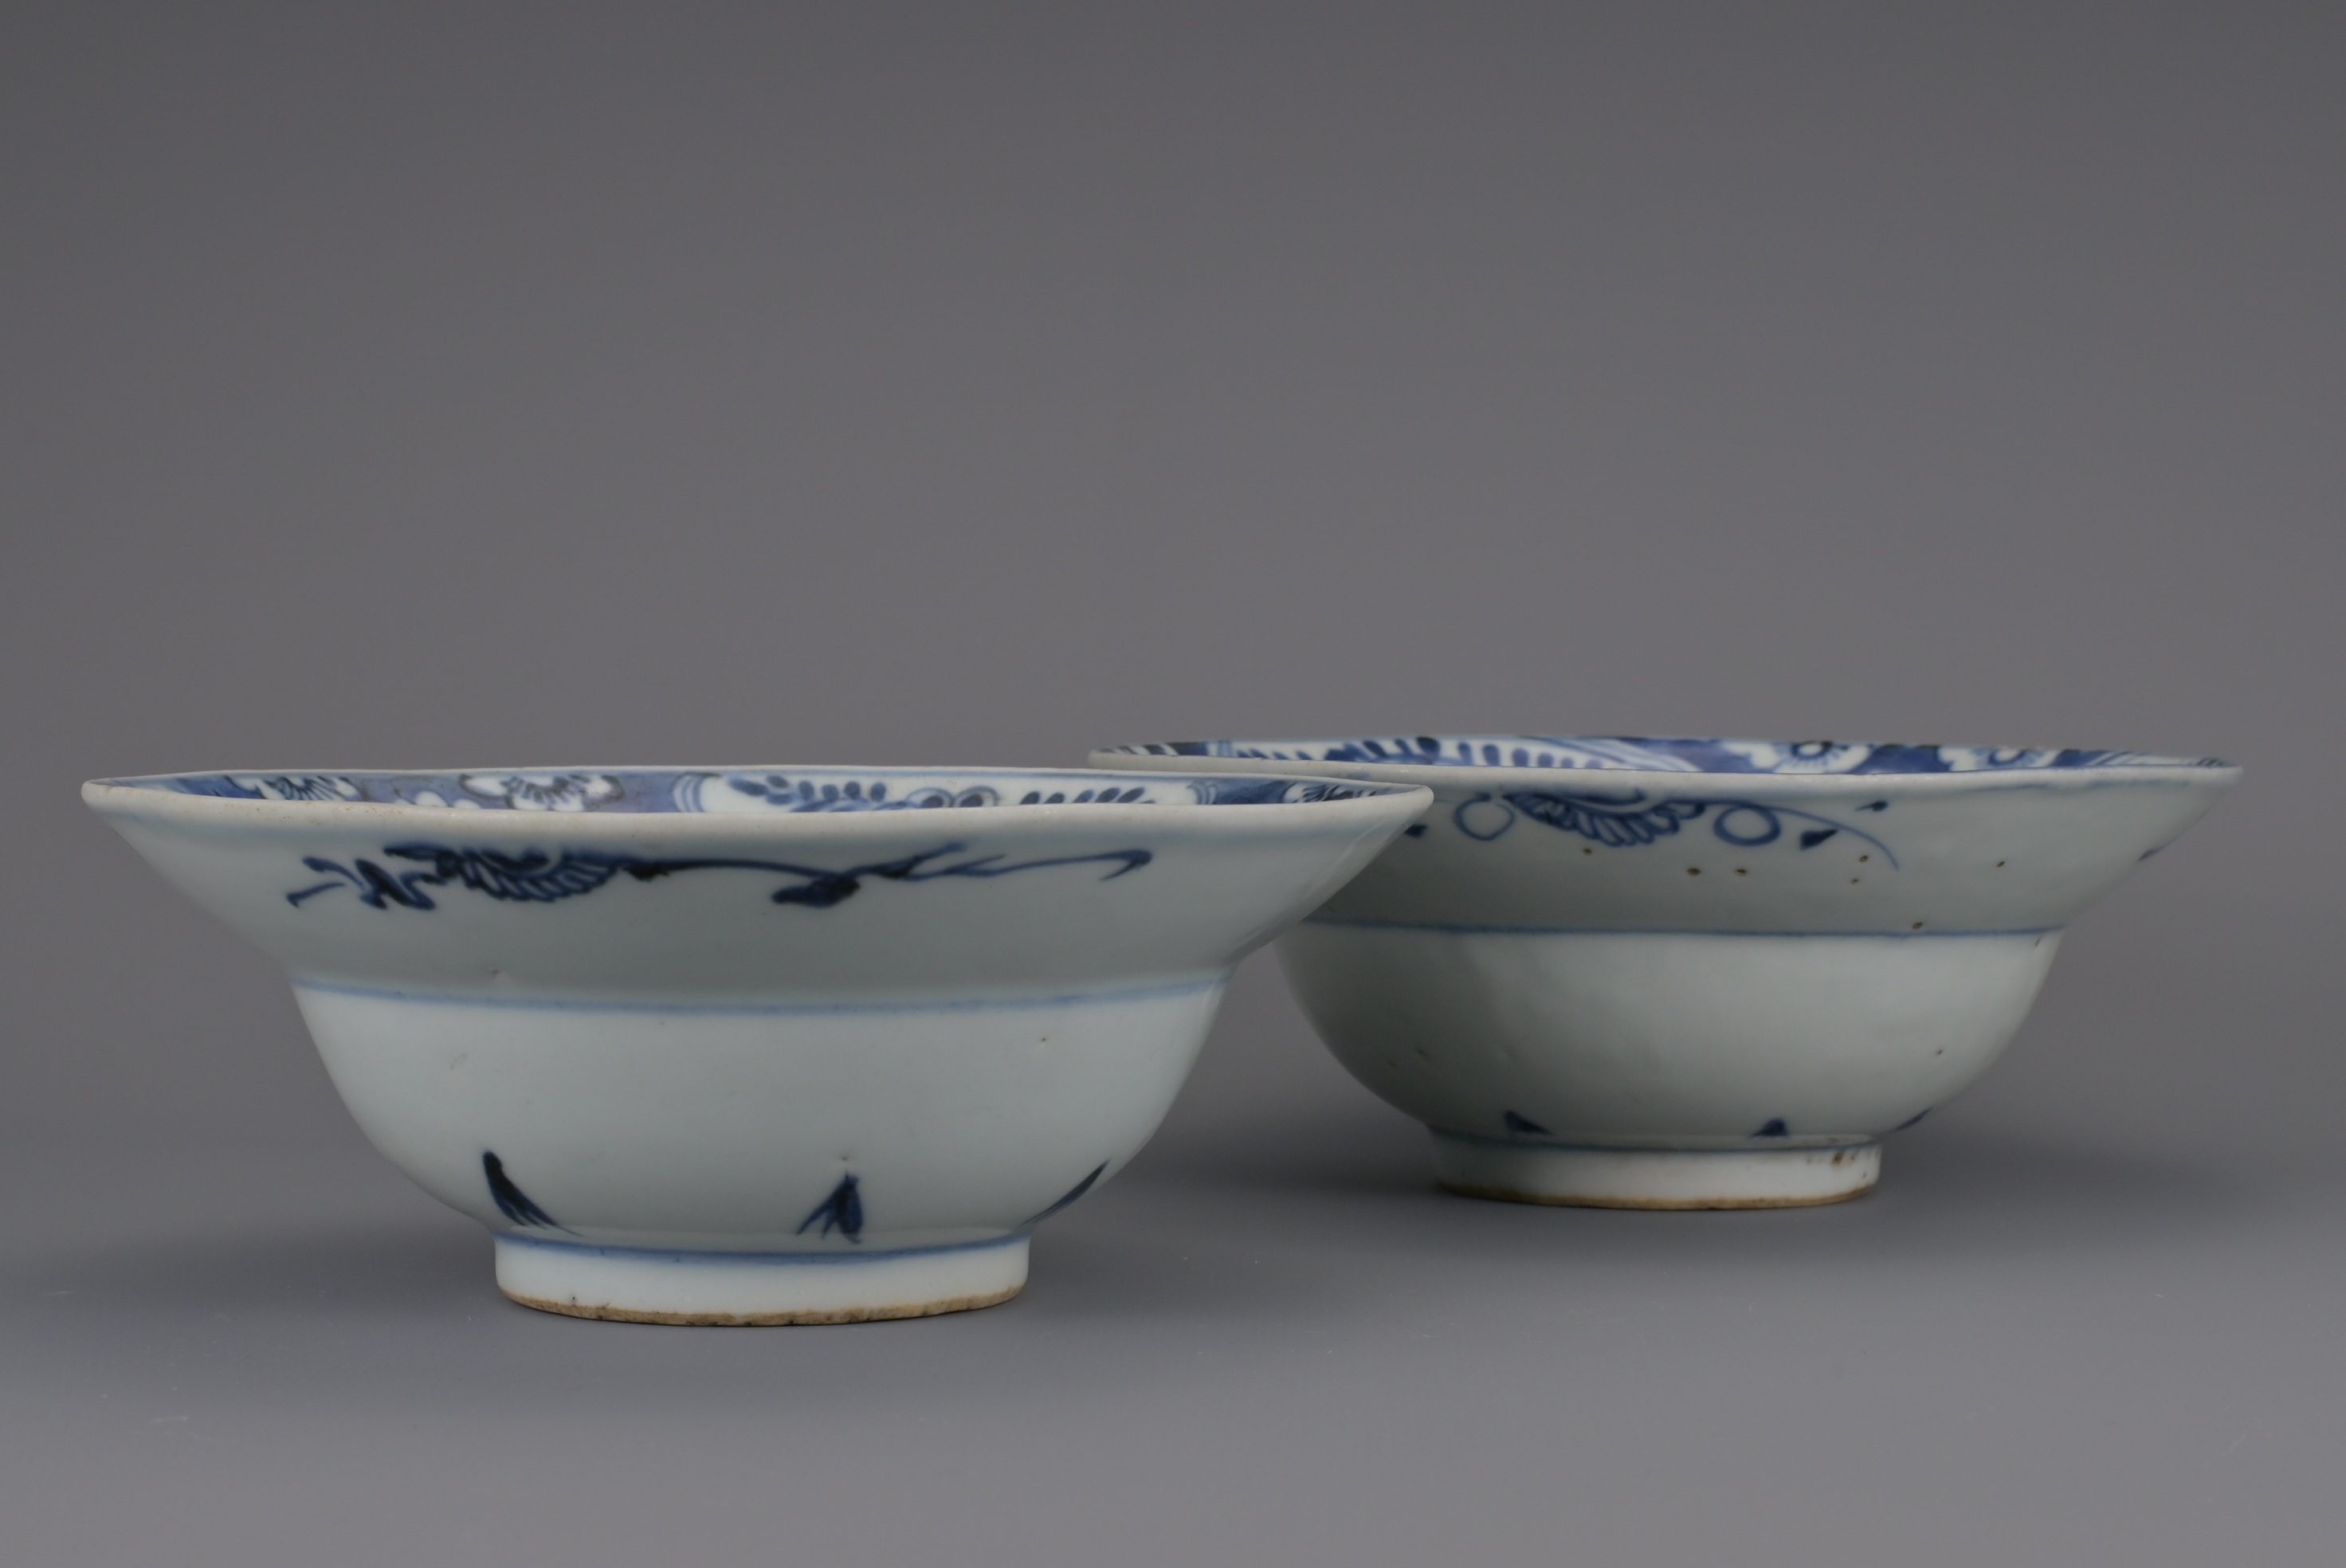 A PAIR OF CHINESE BLUE AND WHITE PORCELAIN KLAPMUTS BOWLS, LATE MING/EARLY QING DYNASTY, 17TH CENTUR - Image 8 of 8